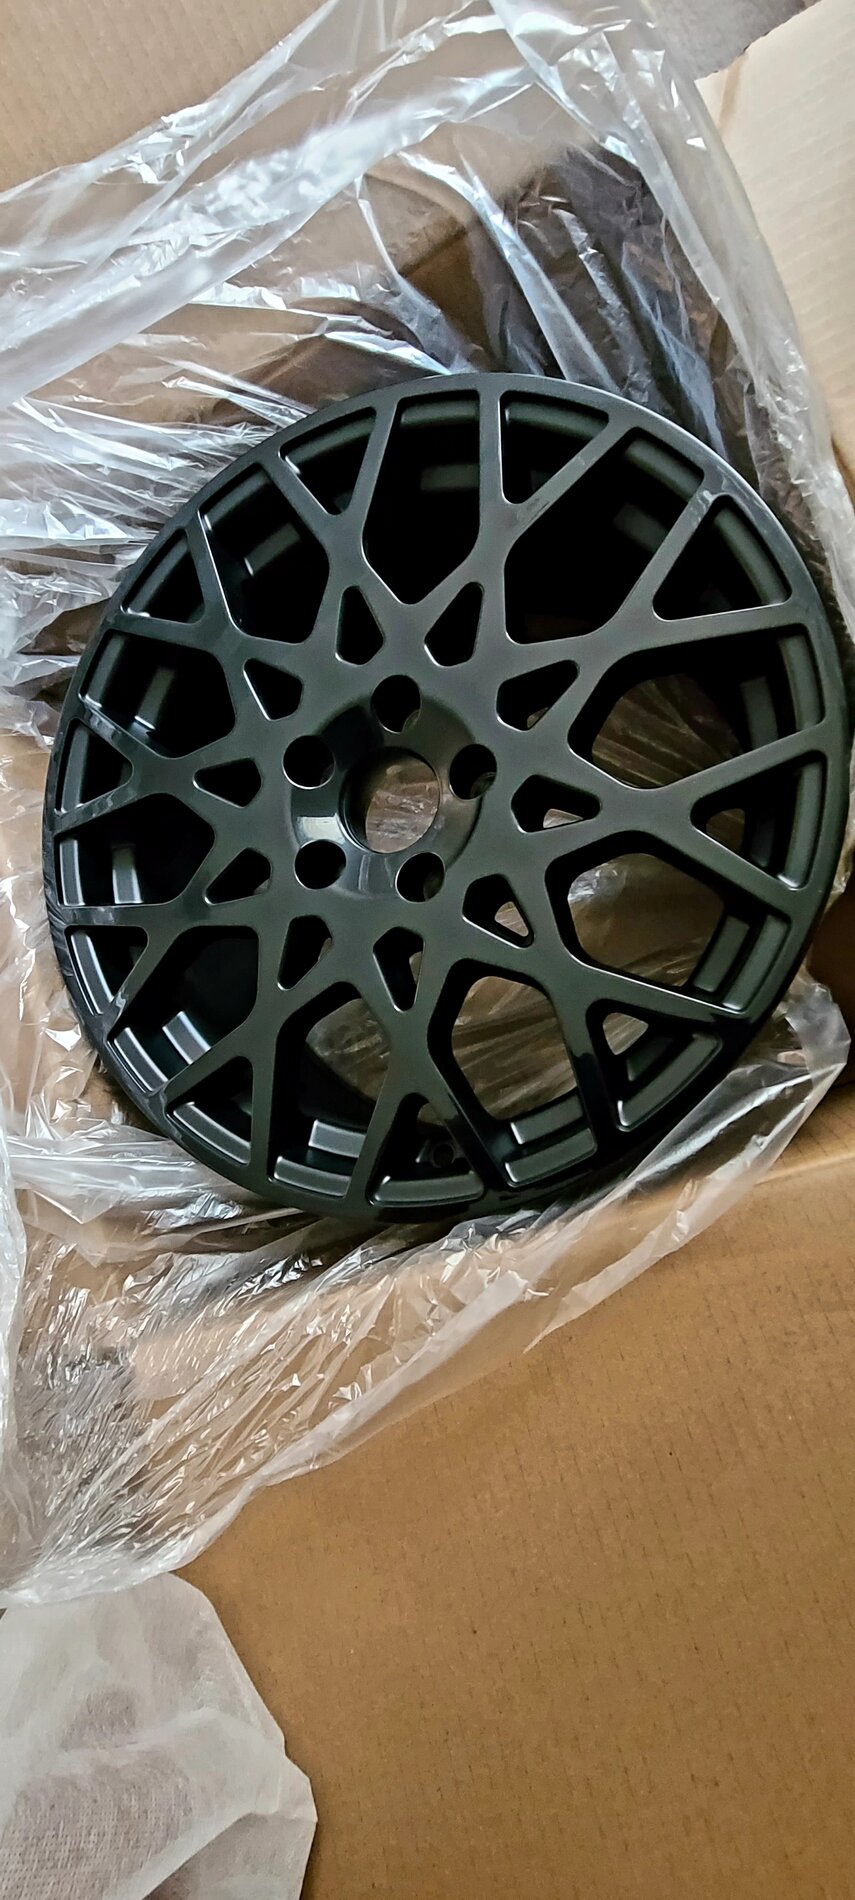 Ford Bronco Sport Post Pictures of Your Aftermarket Wheels Thread 20210713_170915